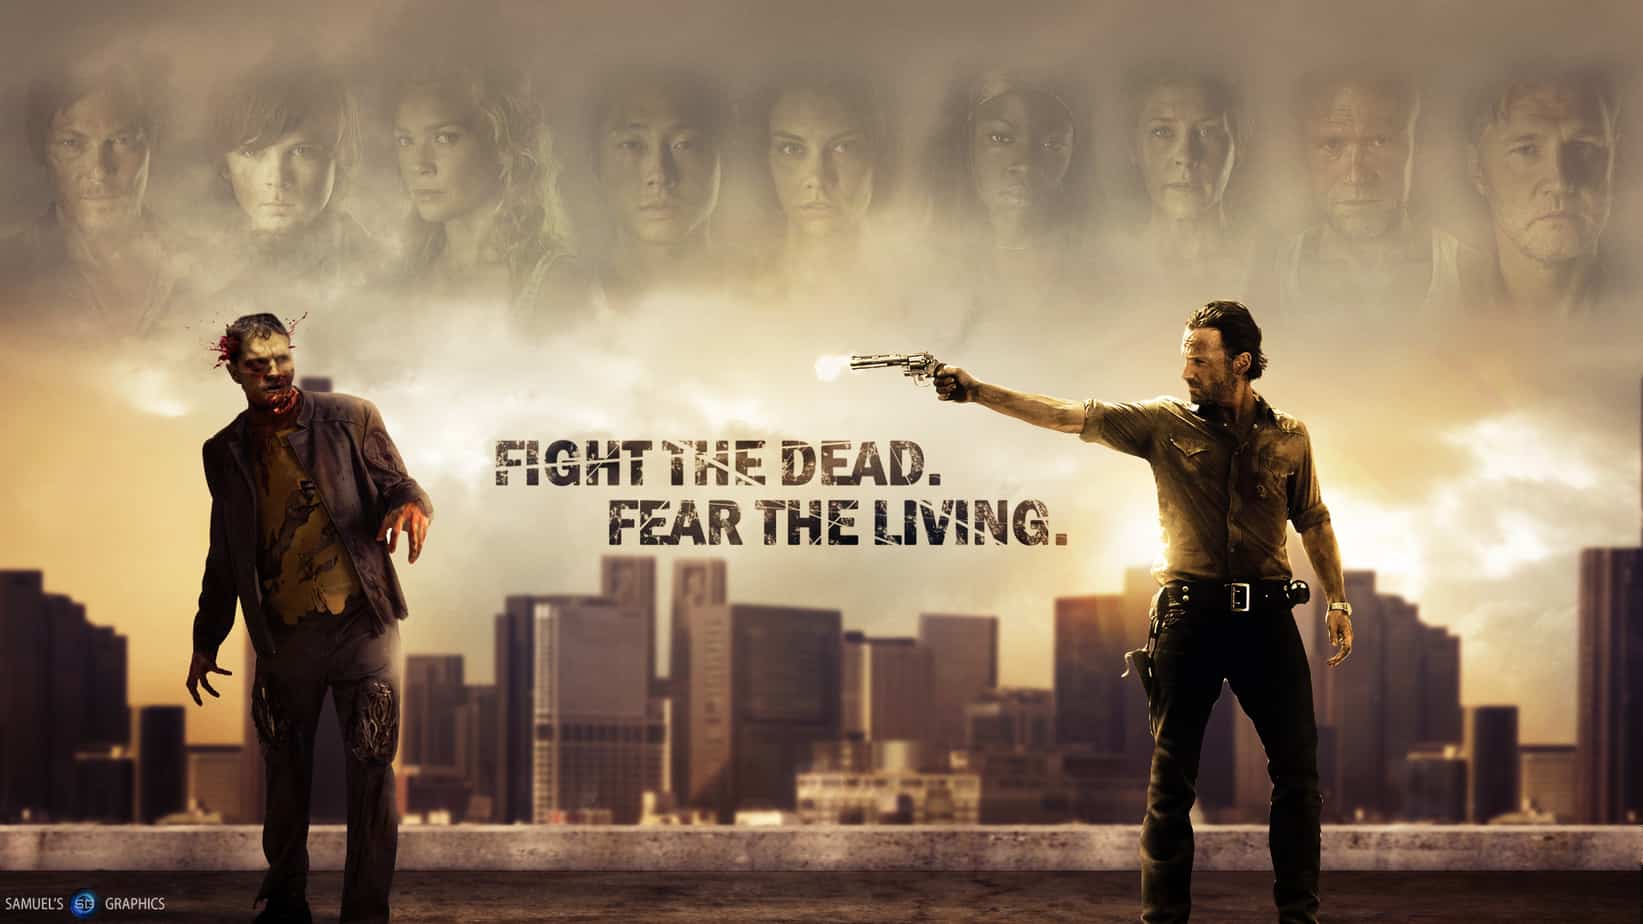 Fight The Dead Fear The Living image from the zombie series The Walking Dead